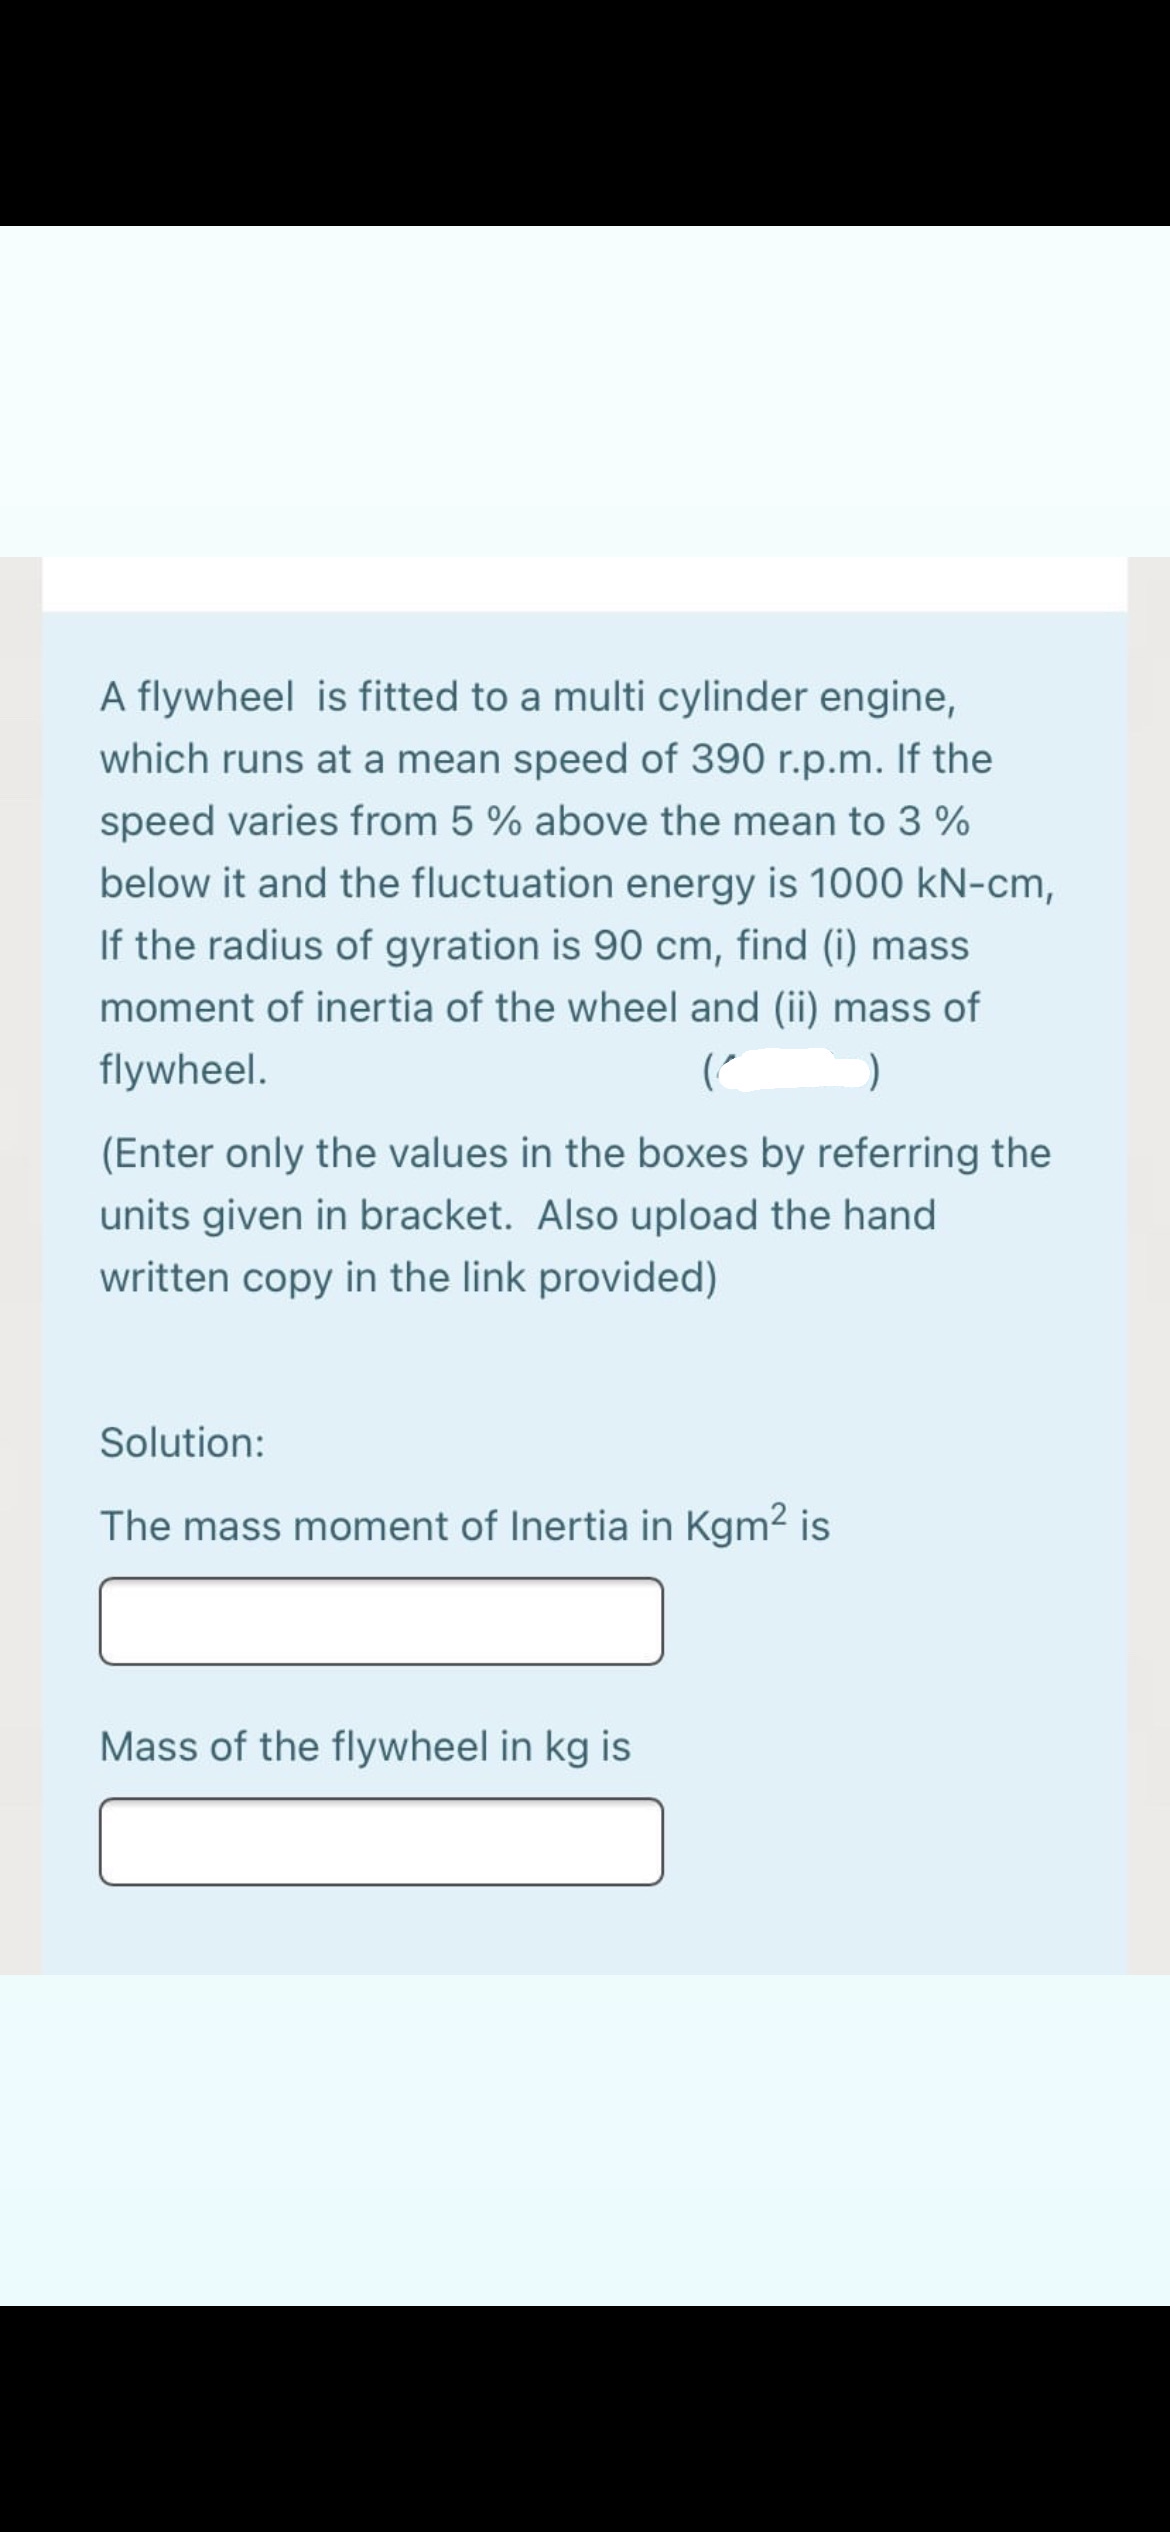 A flywheel is fitted to a multi cylinder engine,
which runs at a mean speed of 390 r.p.m. If the
speed varies from 5 % above the mean to 3 %
below it and the fluctuation energy is 1000 kN-cm,
If the radius of gyration is 90 cm, find (i) mass
moment of inertia of the wheel and (ii) mass of
flywheel.
(Enter only the values in the boxes by referring the
units given in bracket. Also upload the hand
written copy in the link provided)
Solution:
The mass moment of Inertia in Kgm2 is
Mass of the flywheel in kg is
